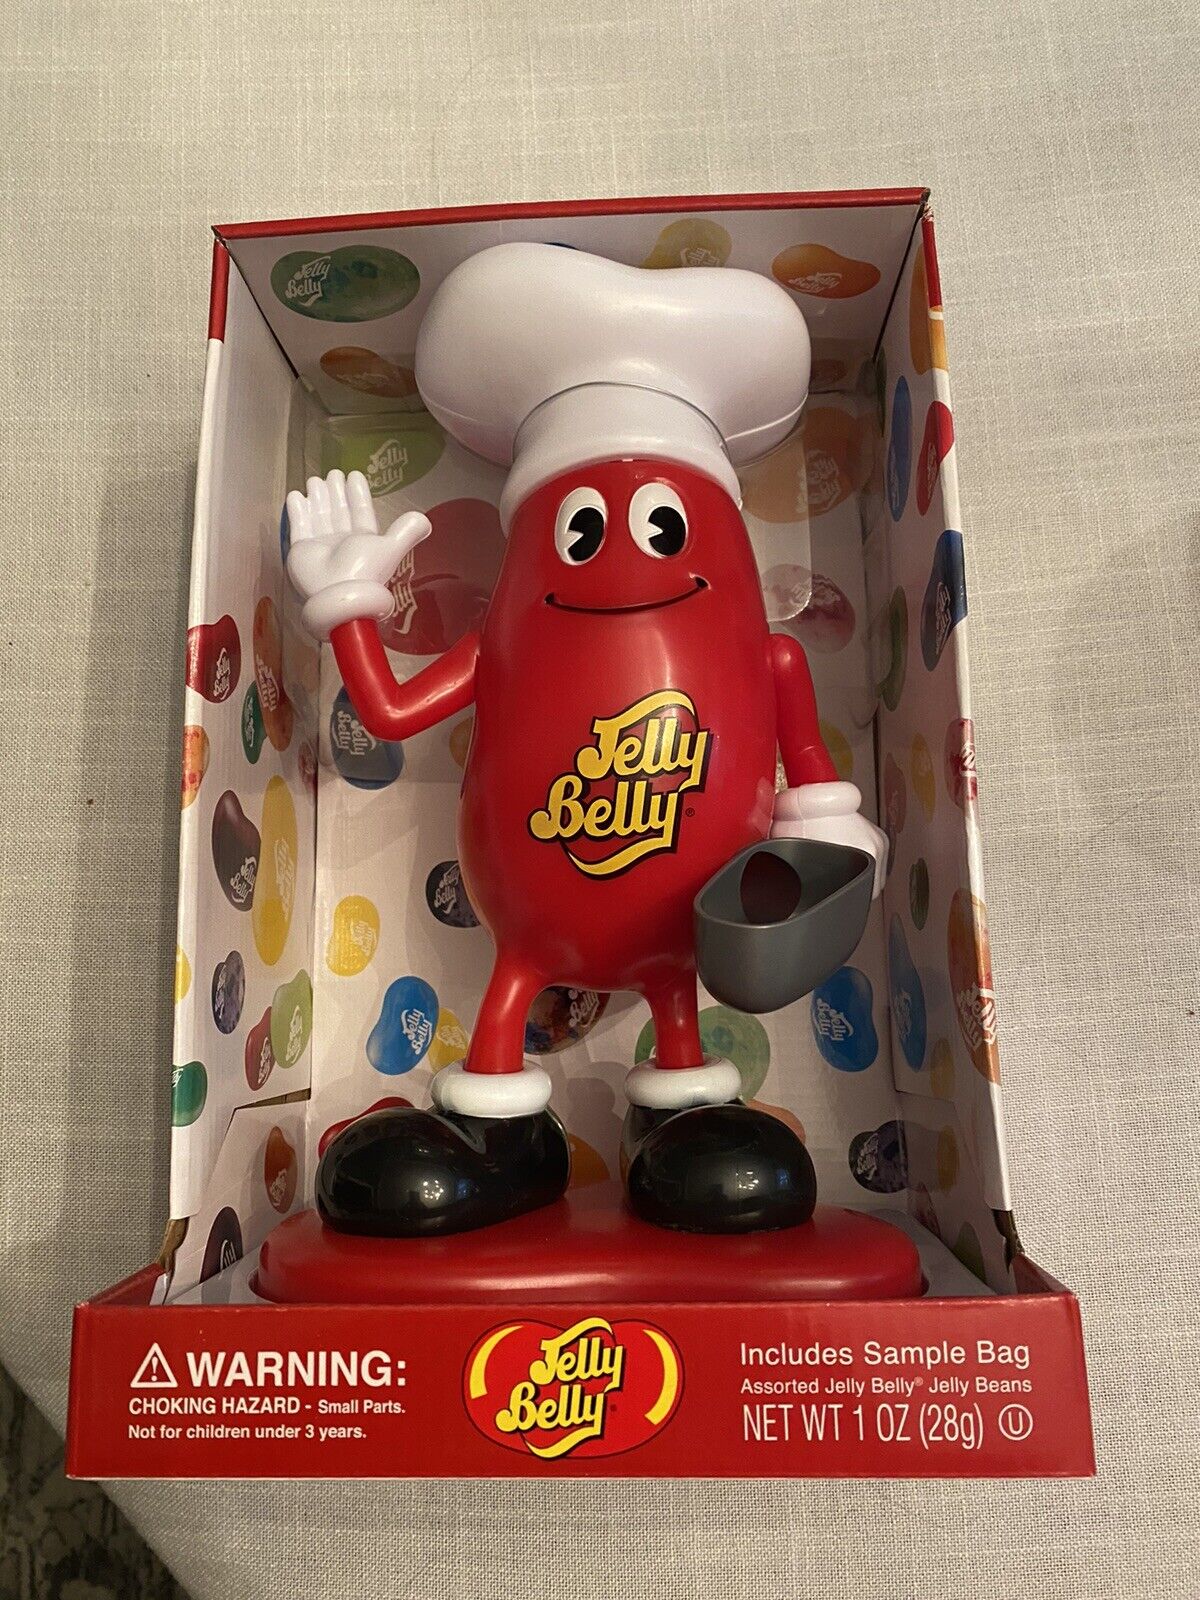 Rare Mr. Jelly Belly Candy Store Display Advertising Figure Statue